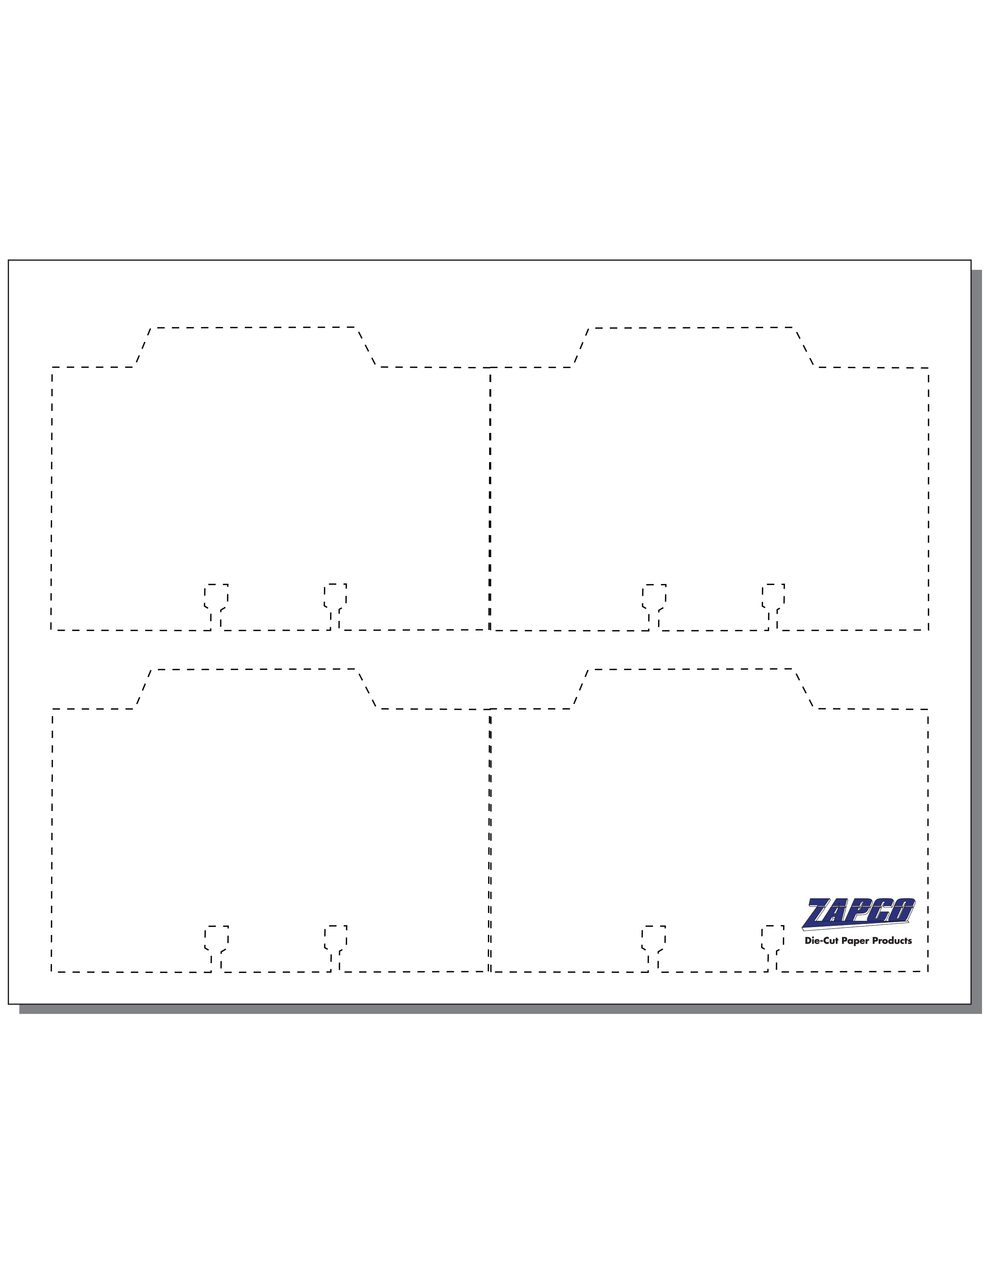 Item 119: 4-Up 3" x 5" Rotary File Card Center Tab 8 1/2" x 11" Sheet(250 Sheets)